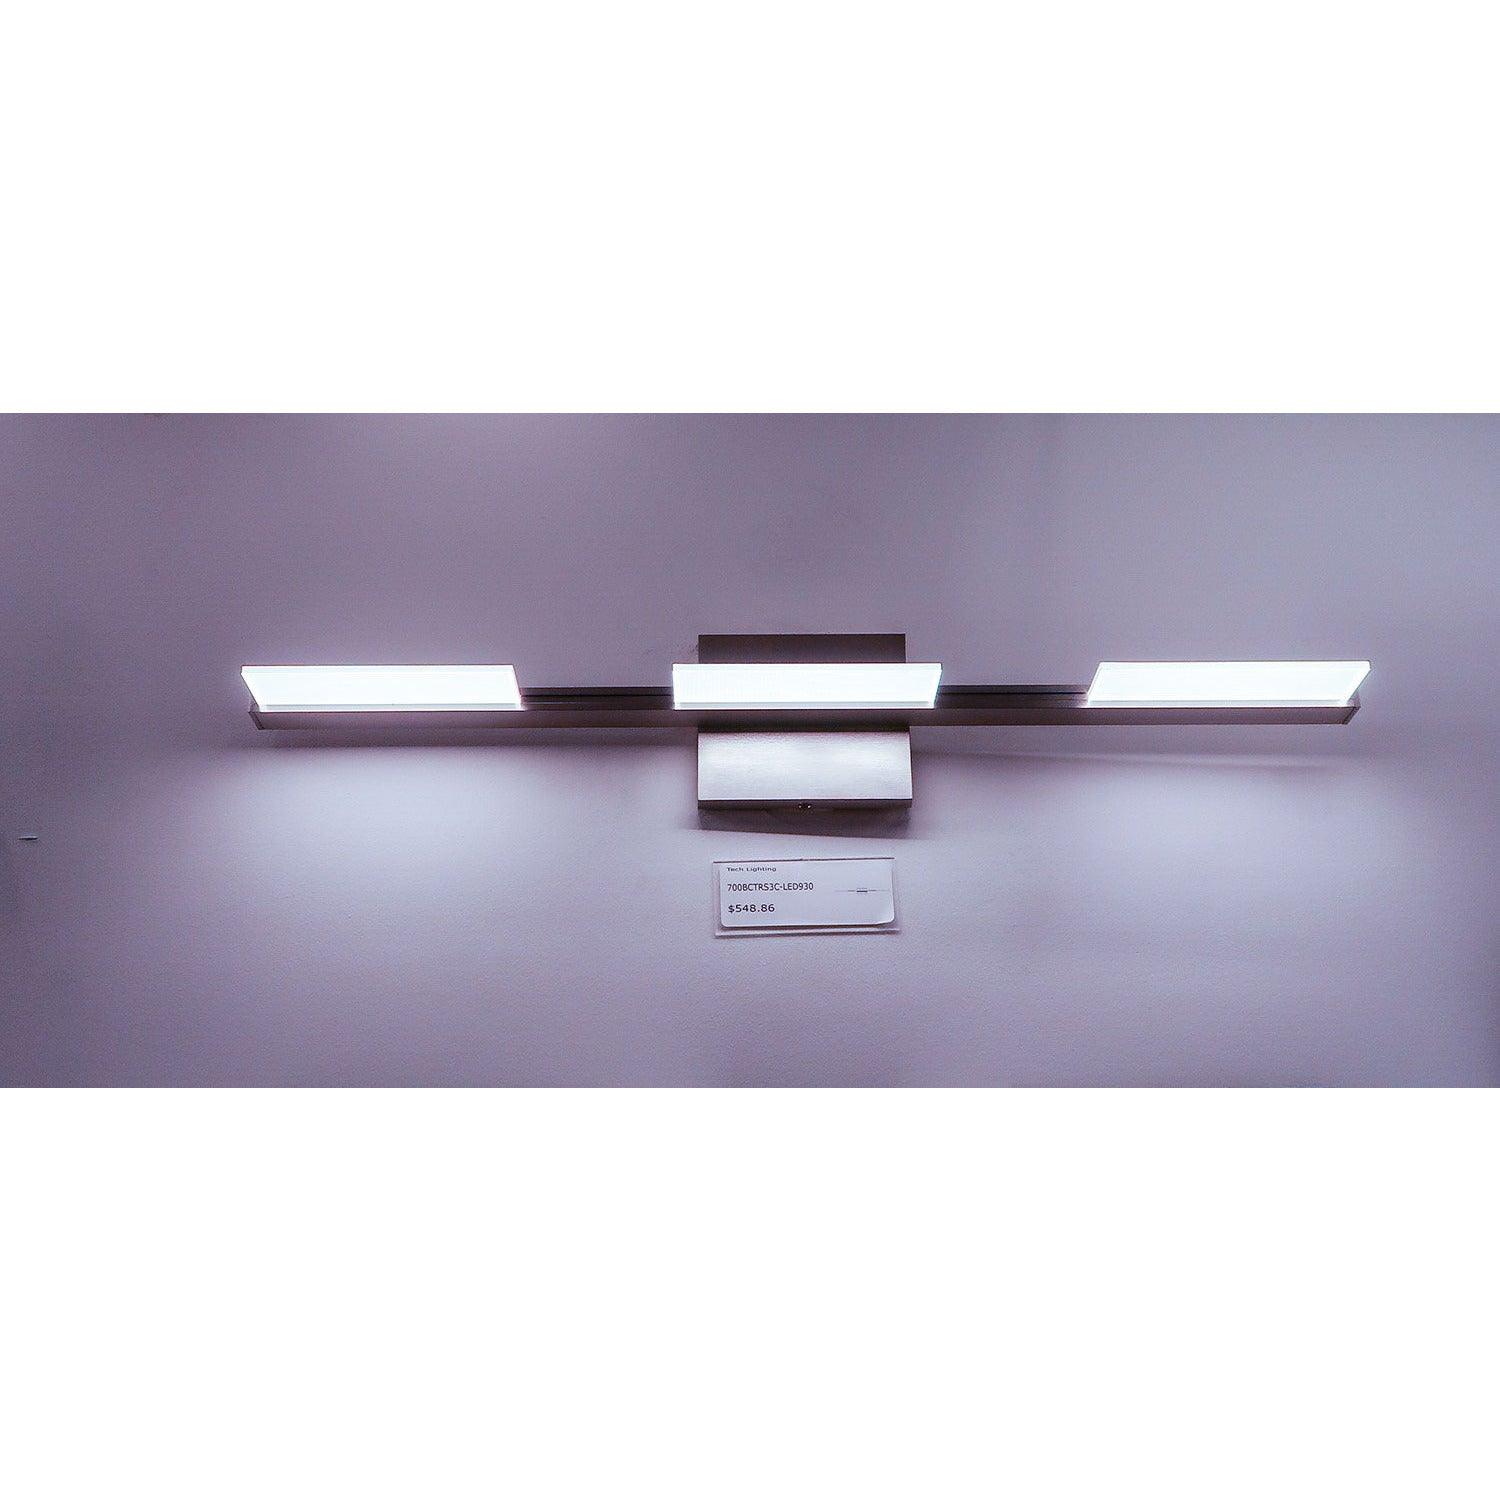 Montreal Lighting & Hardware - Tris LED Bath by Visual Comfort Modern Collection | Open Box - 700BCTRS3C-LED930-OB | Montreal Lighting & Hardware